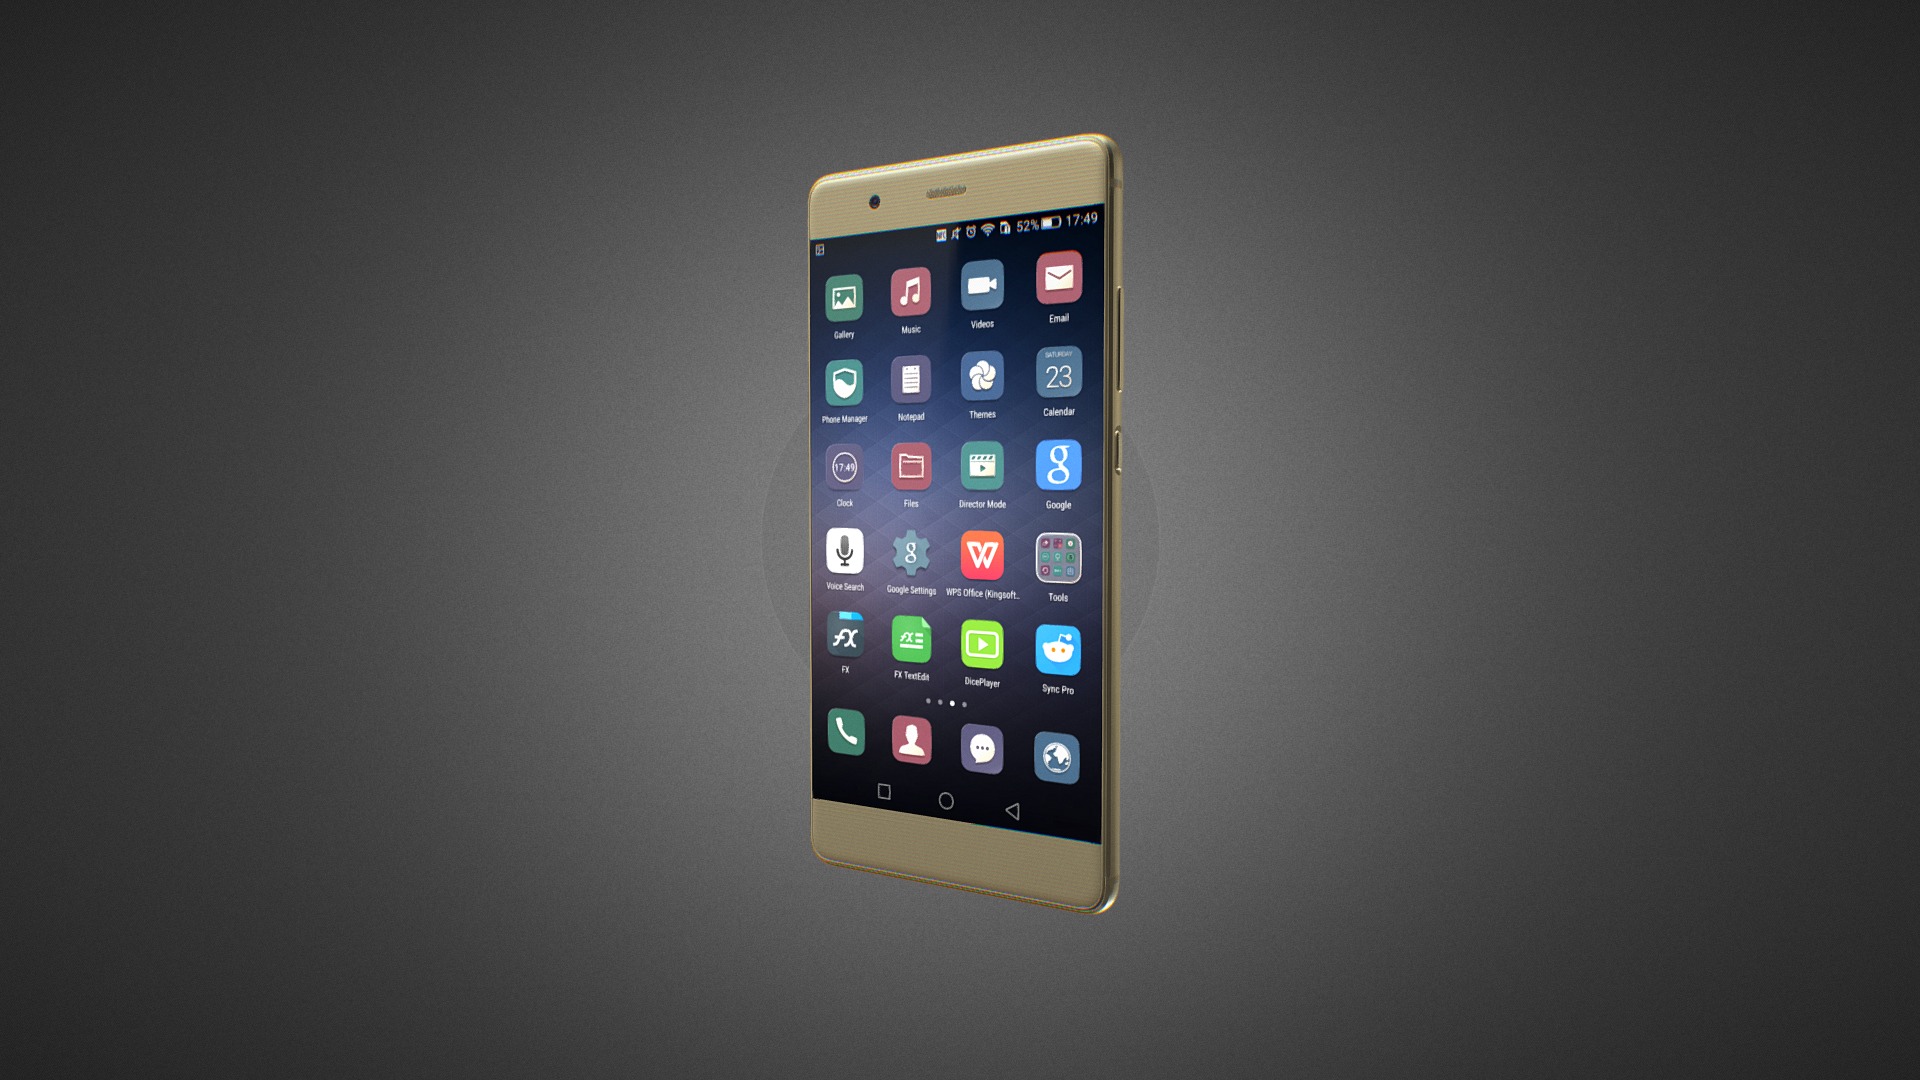 3D model Huawei P9 for Element 3D - This is a 3D model of the Huawei P9 for Element 3D. The 3D model is about a cell phone on a table.